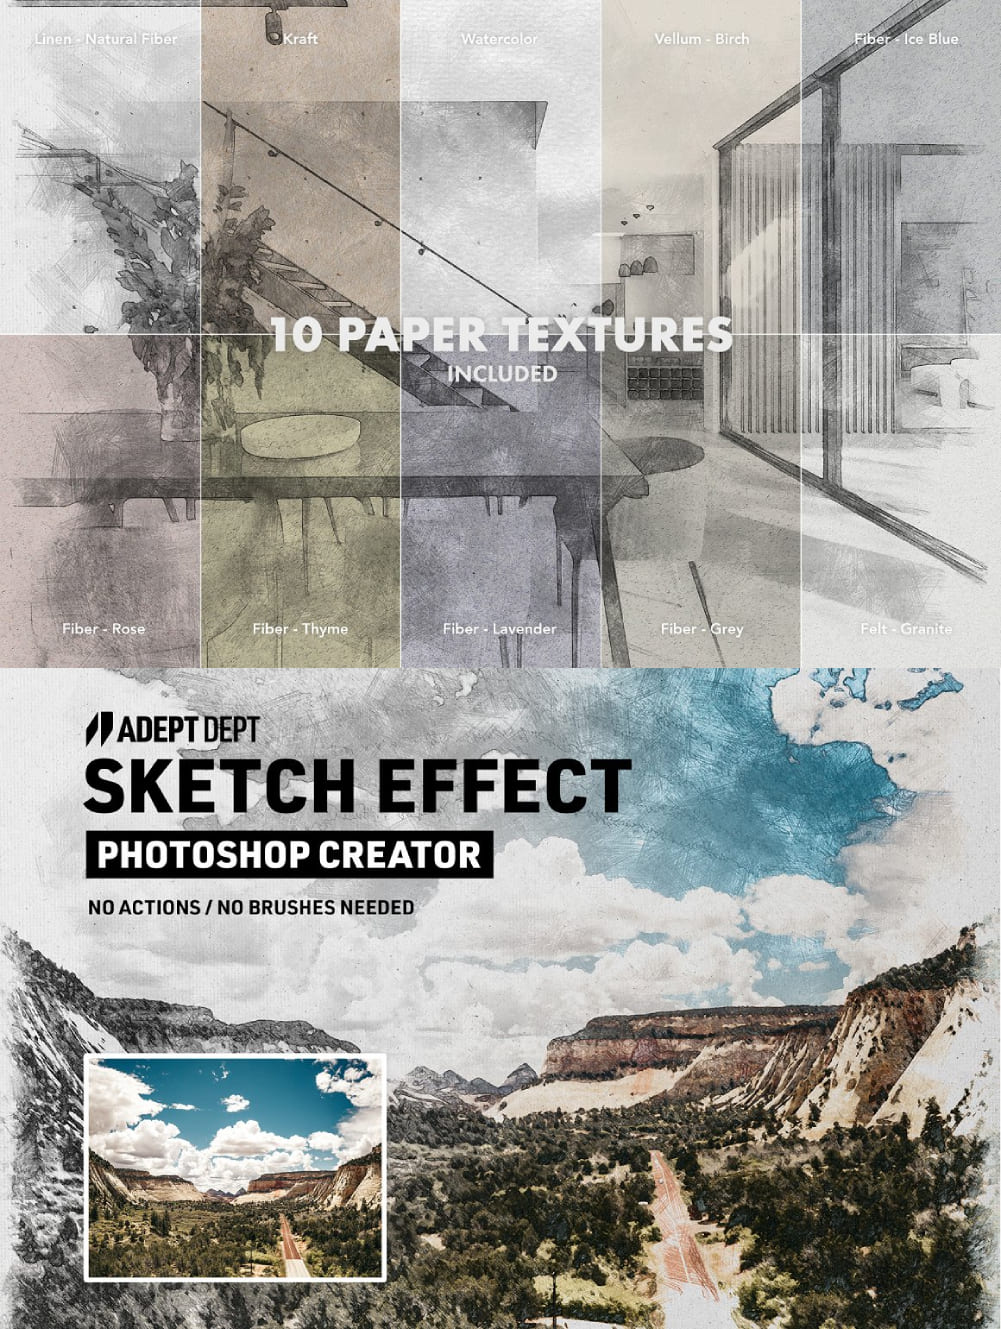 Pack of charming images with sketch effect.